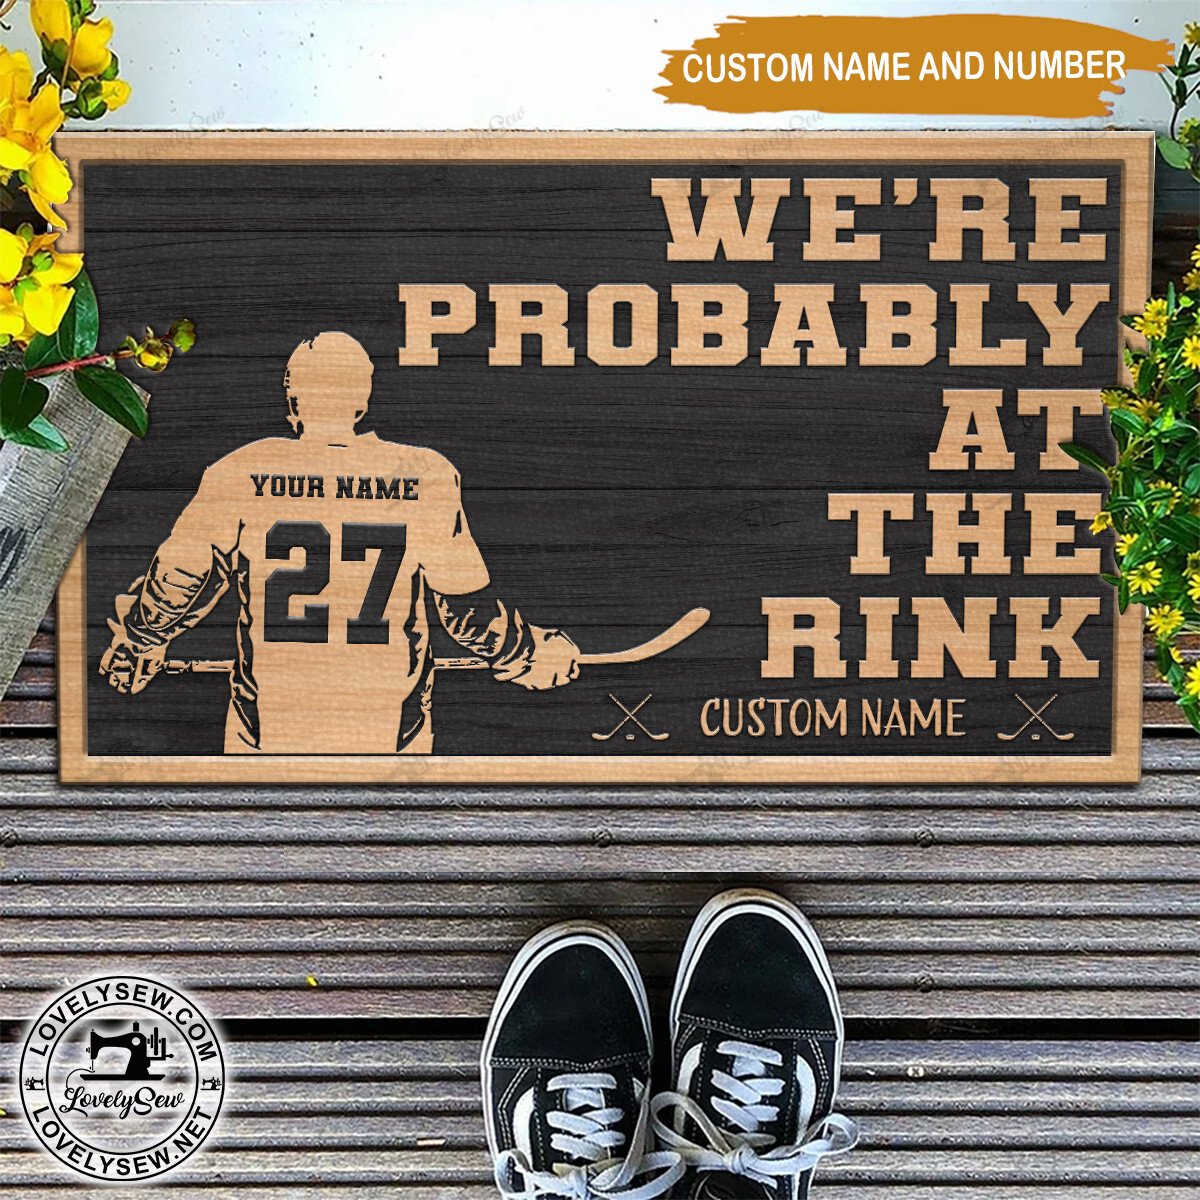 Custom Name Number Hockey Player At the rink Gray Doormat 